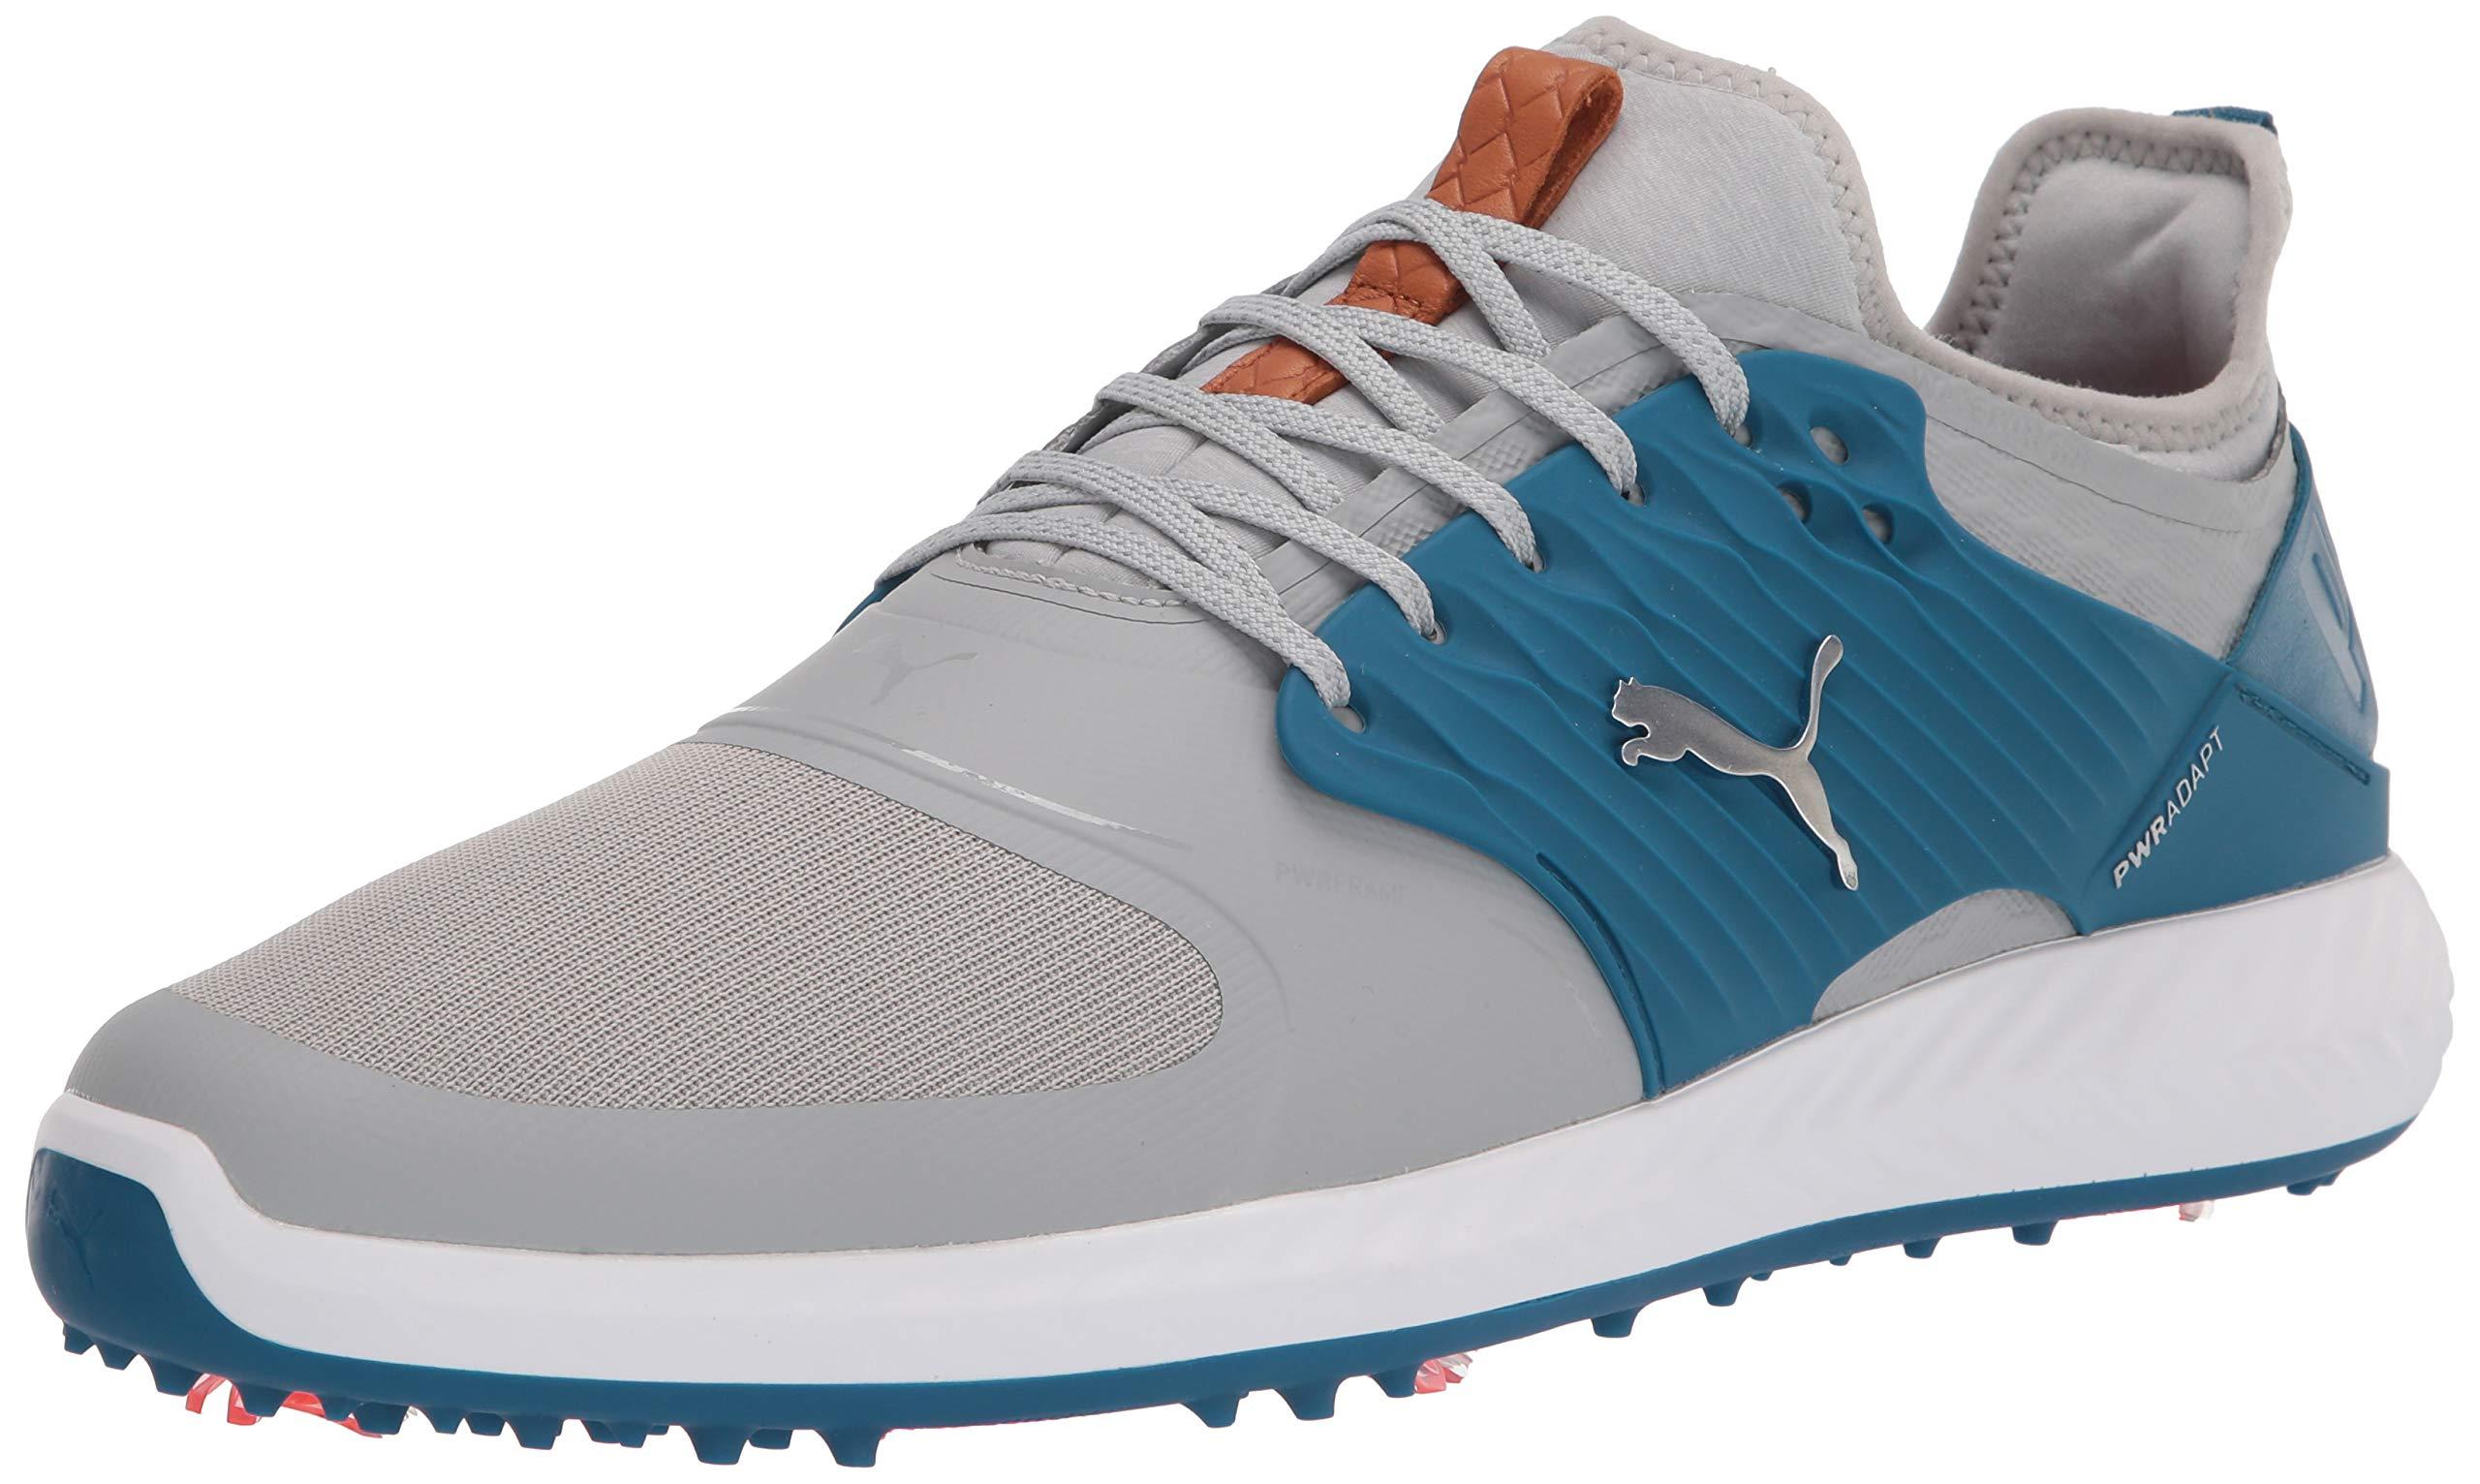 PUMA Ignite Pwradapt Caged Golf Shoe in Blue for Men - Lyst